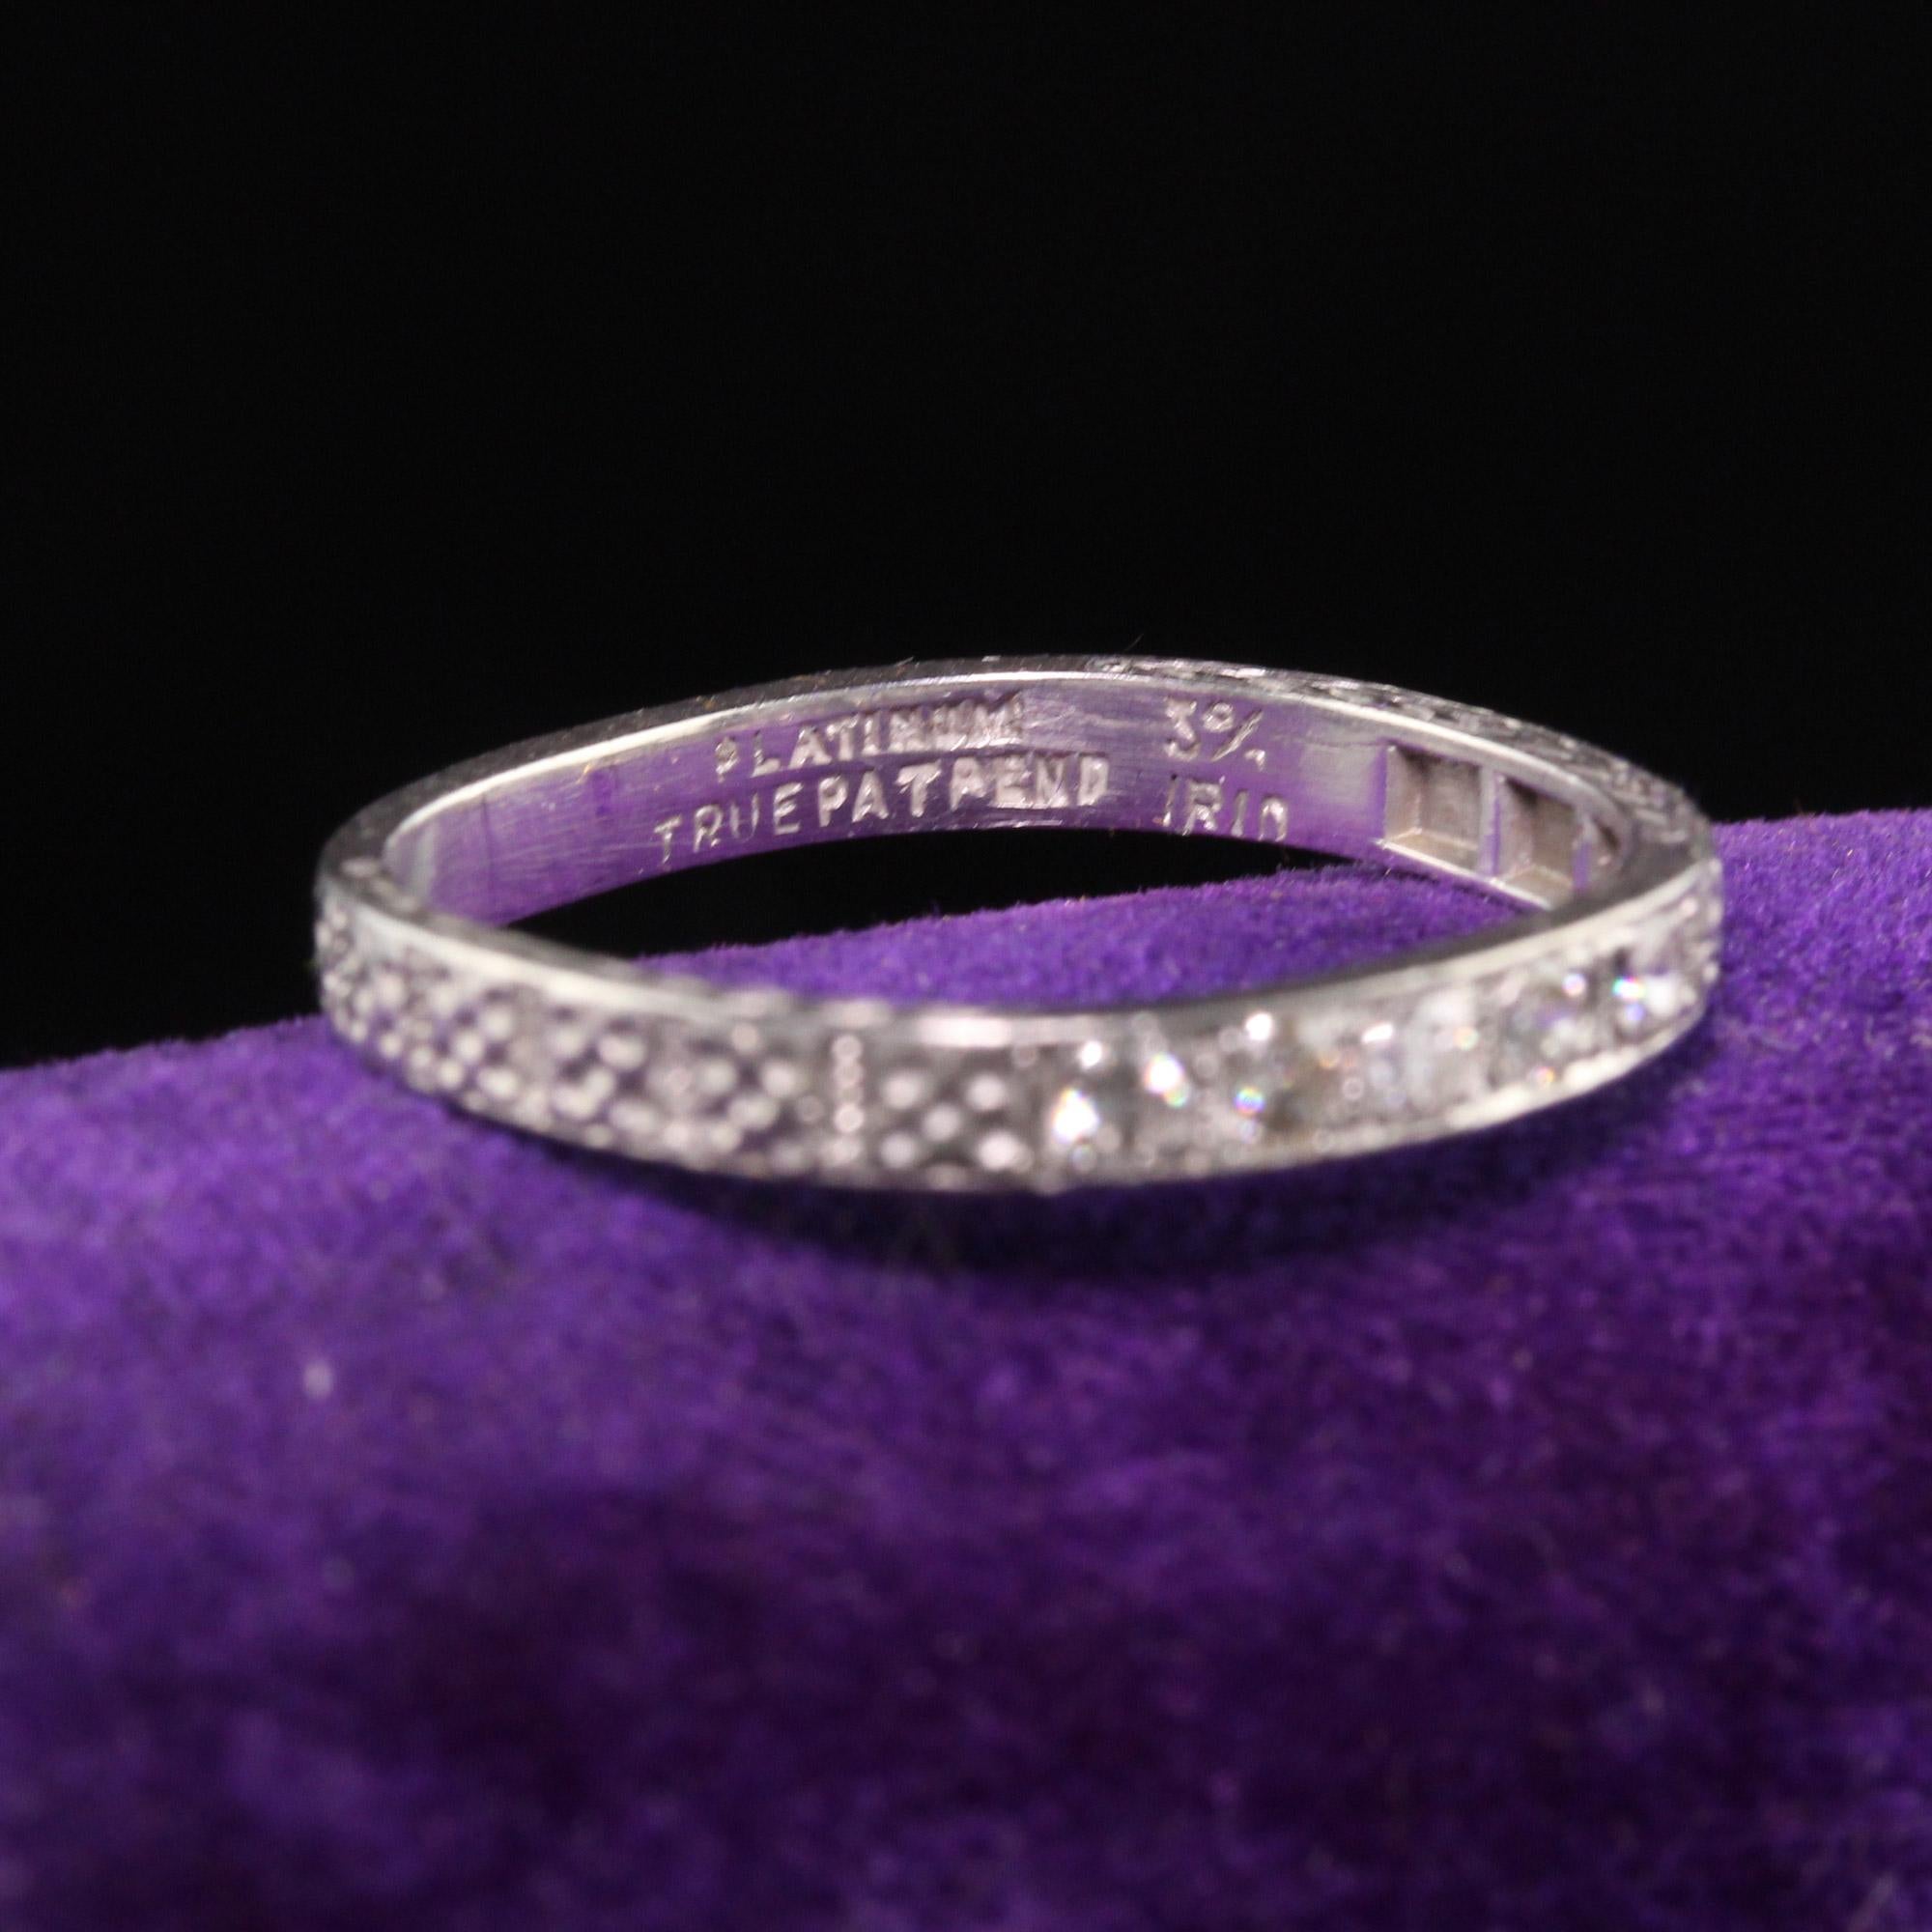 A Gorgeous Antique Art Deco Platinum Five Diamond Engraved Wedding Band - Size 6 1/4. This beautiful band has an interesting squarish shape. It is 100% original and does not show any signs of repairs.

#R0786

Metal: Platinum

Weight: 3 Grams

Total